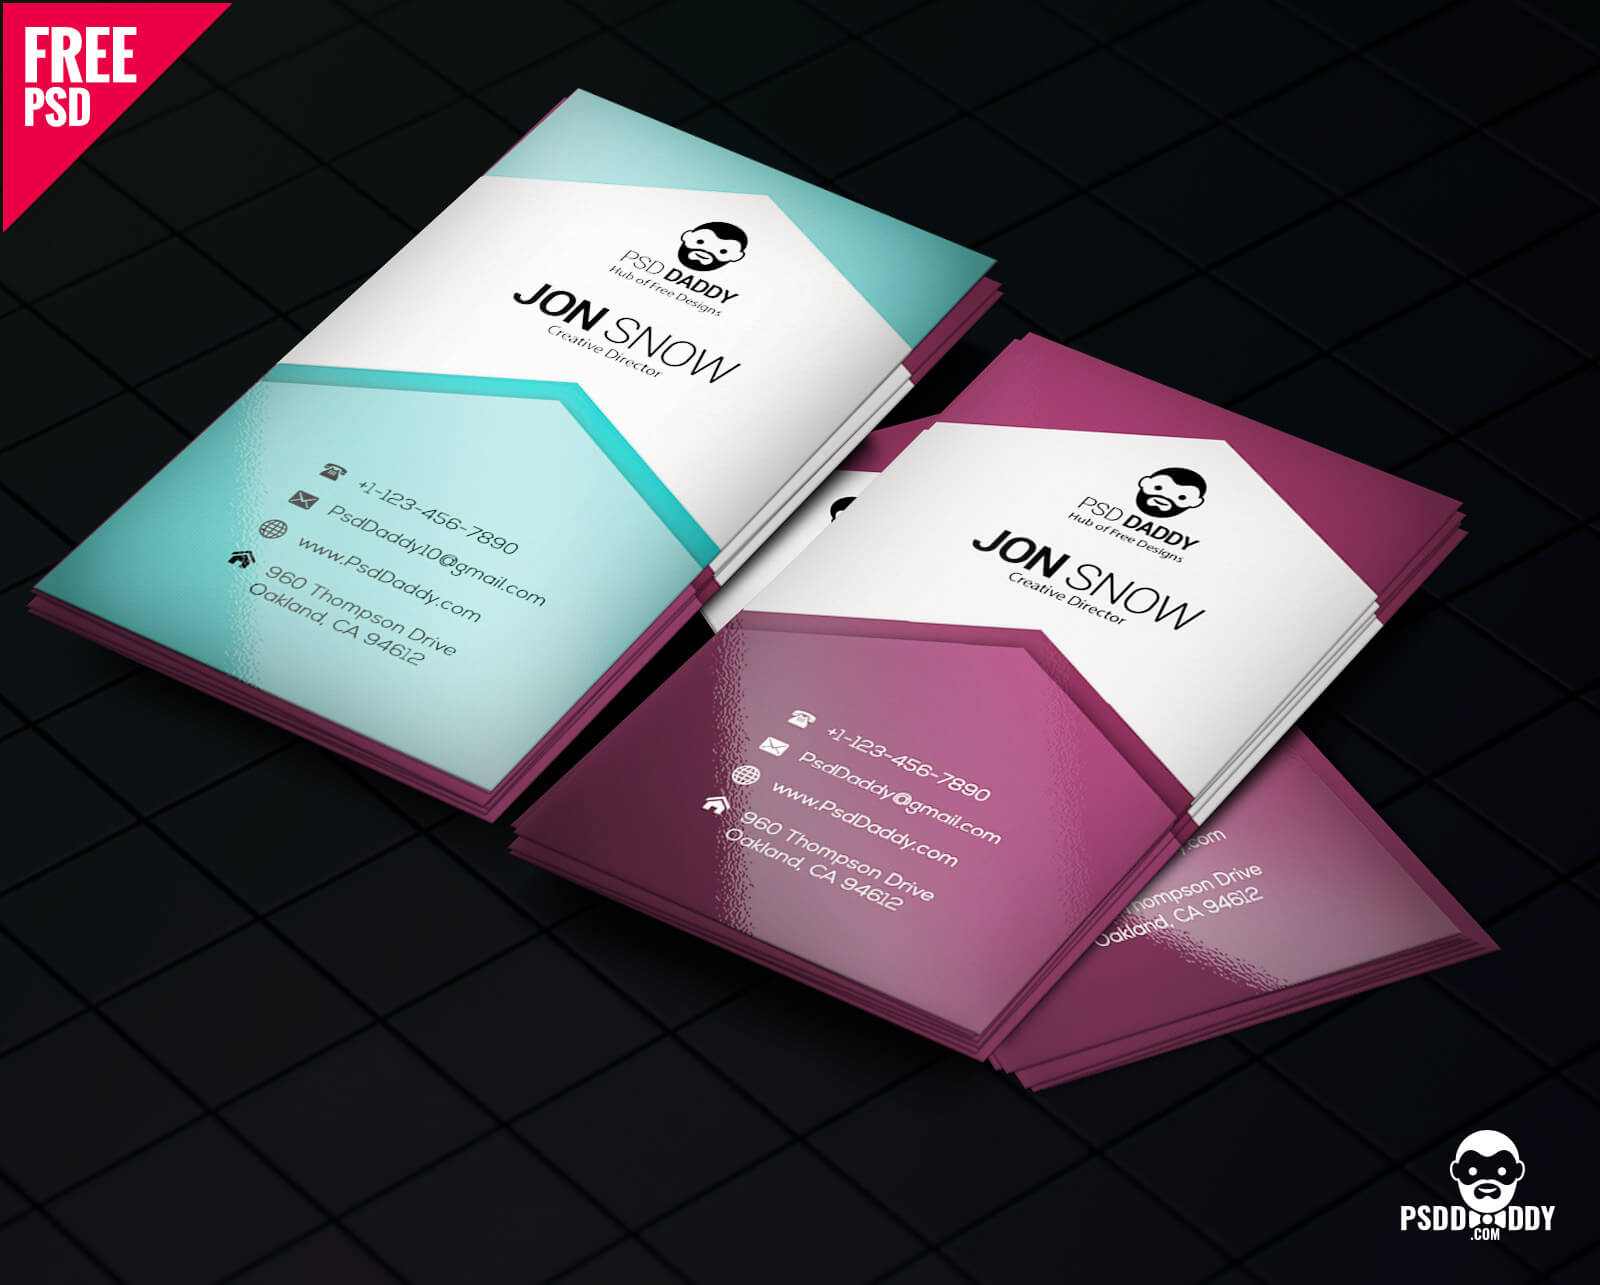 Download]Creative Business Card Psd Free | Psddaddy Intended For Free Complimentary Card Templates